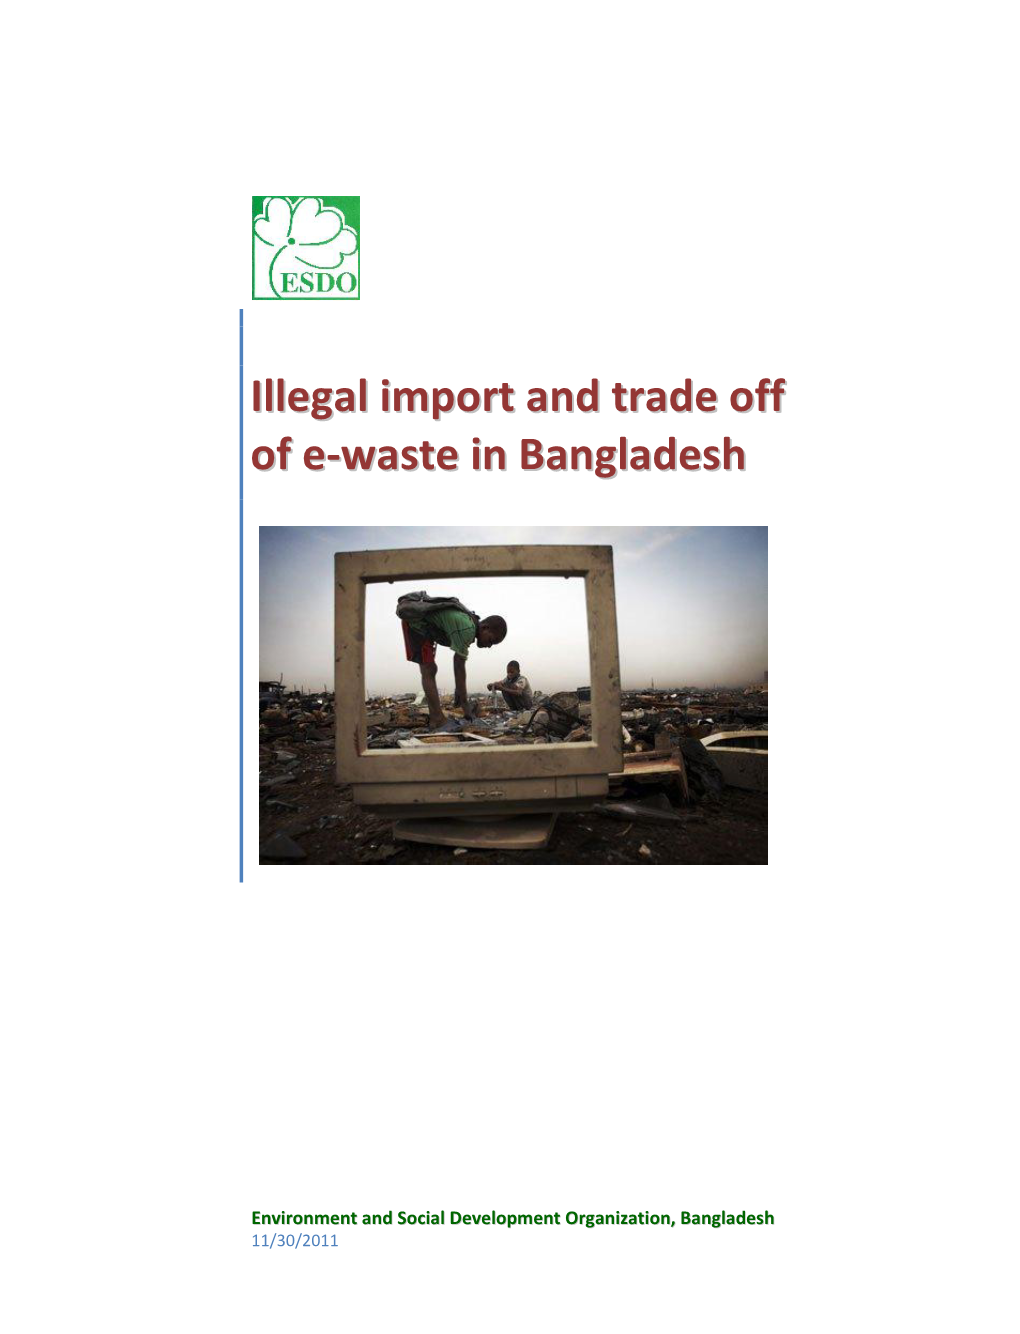 Illegal Import and Trade Off of E-Waste in Bangladesh